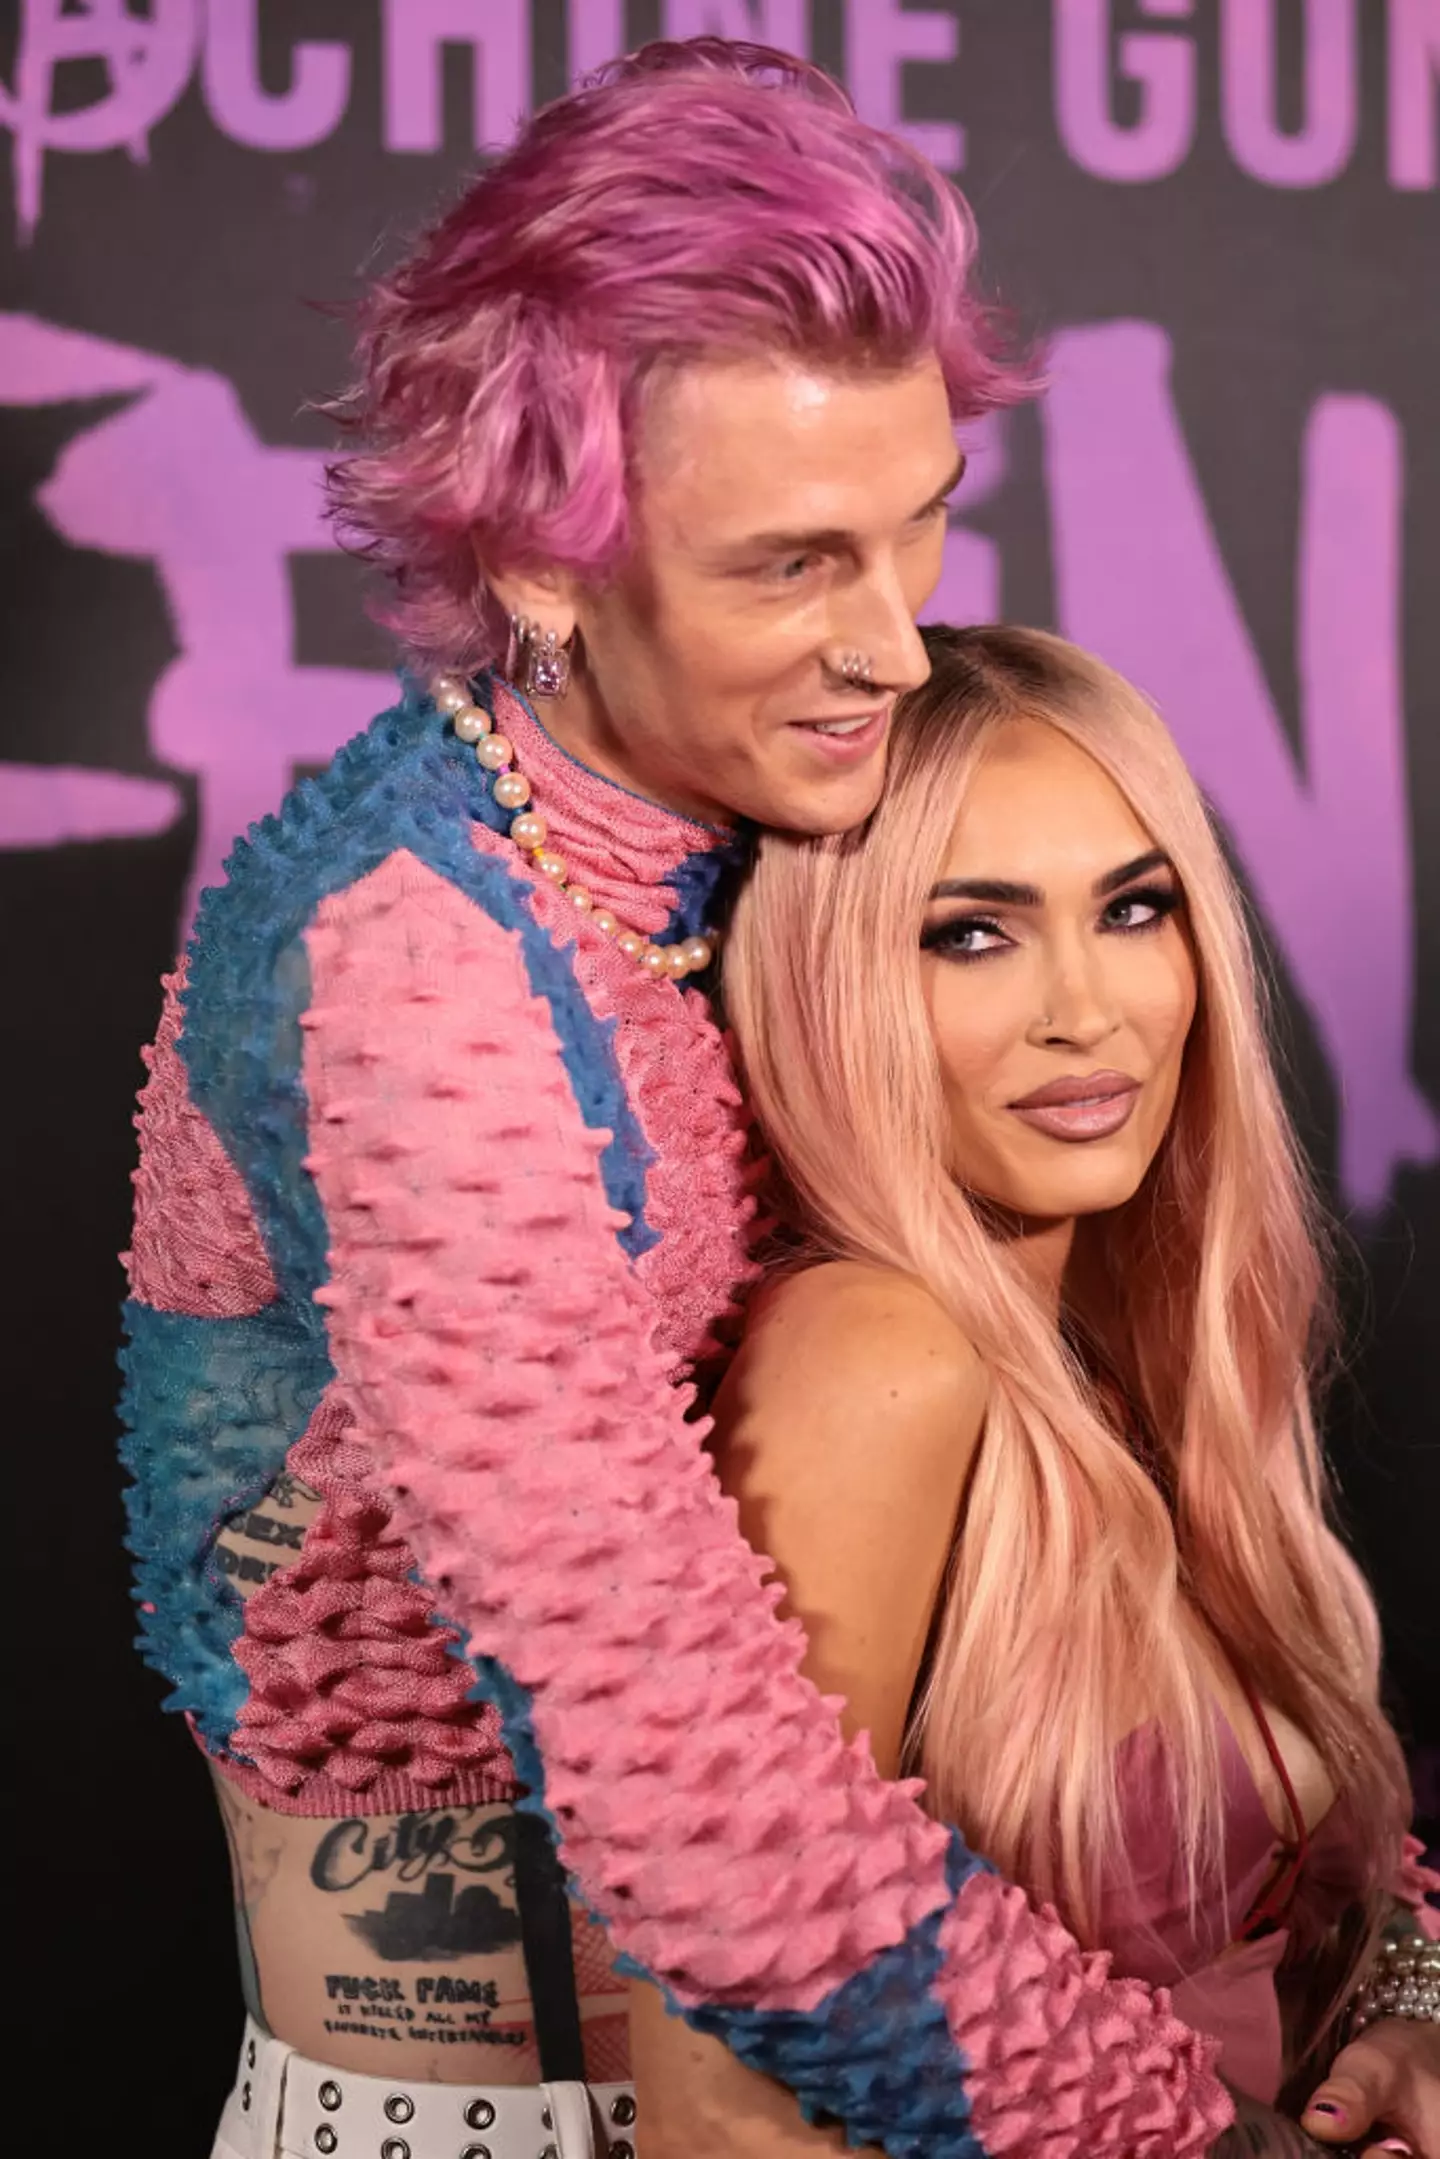 The Transformers star and MGK have called off their wedding. (Jamie McCarthy / Staff / Getty Images)